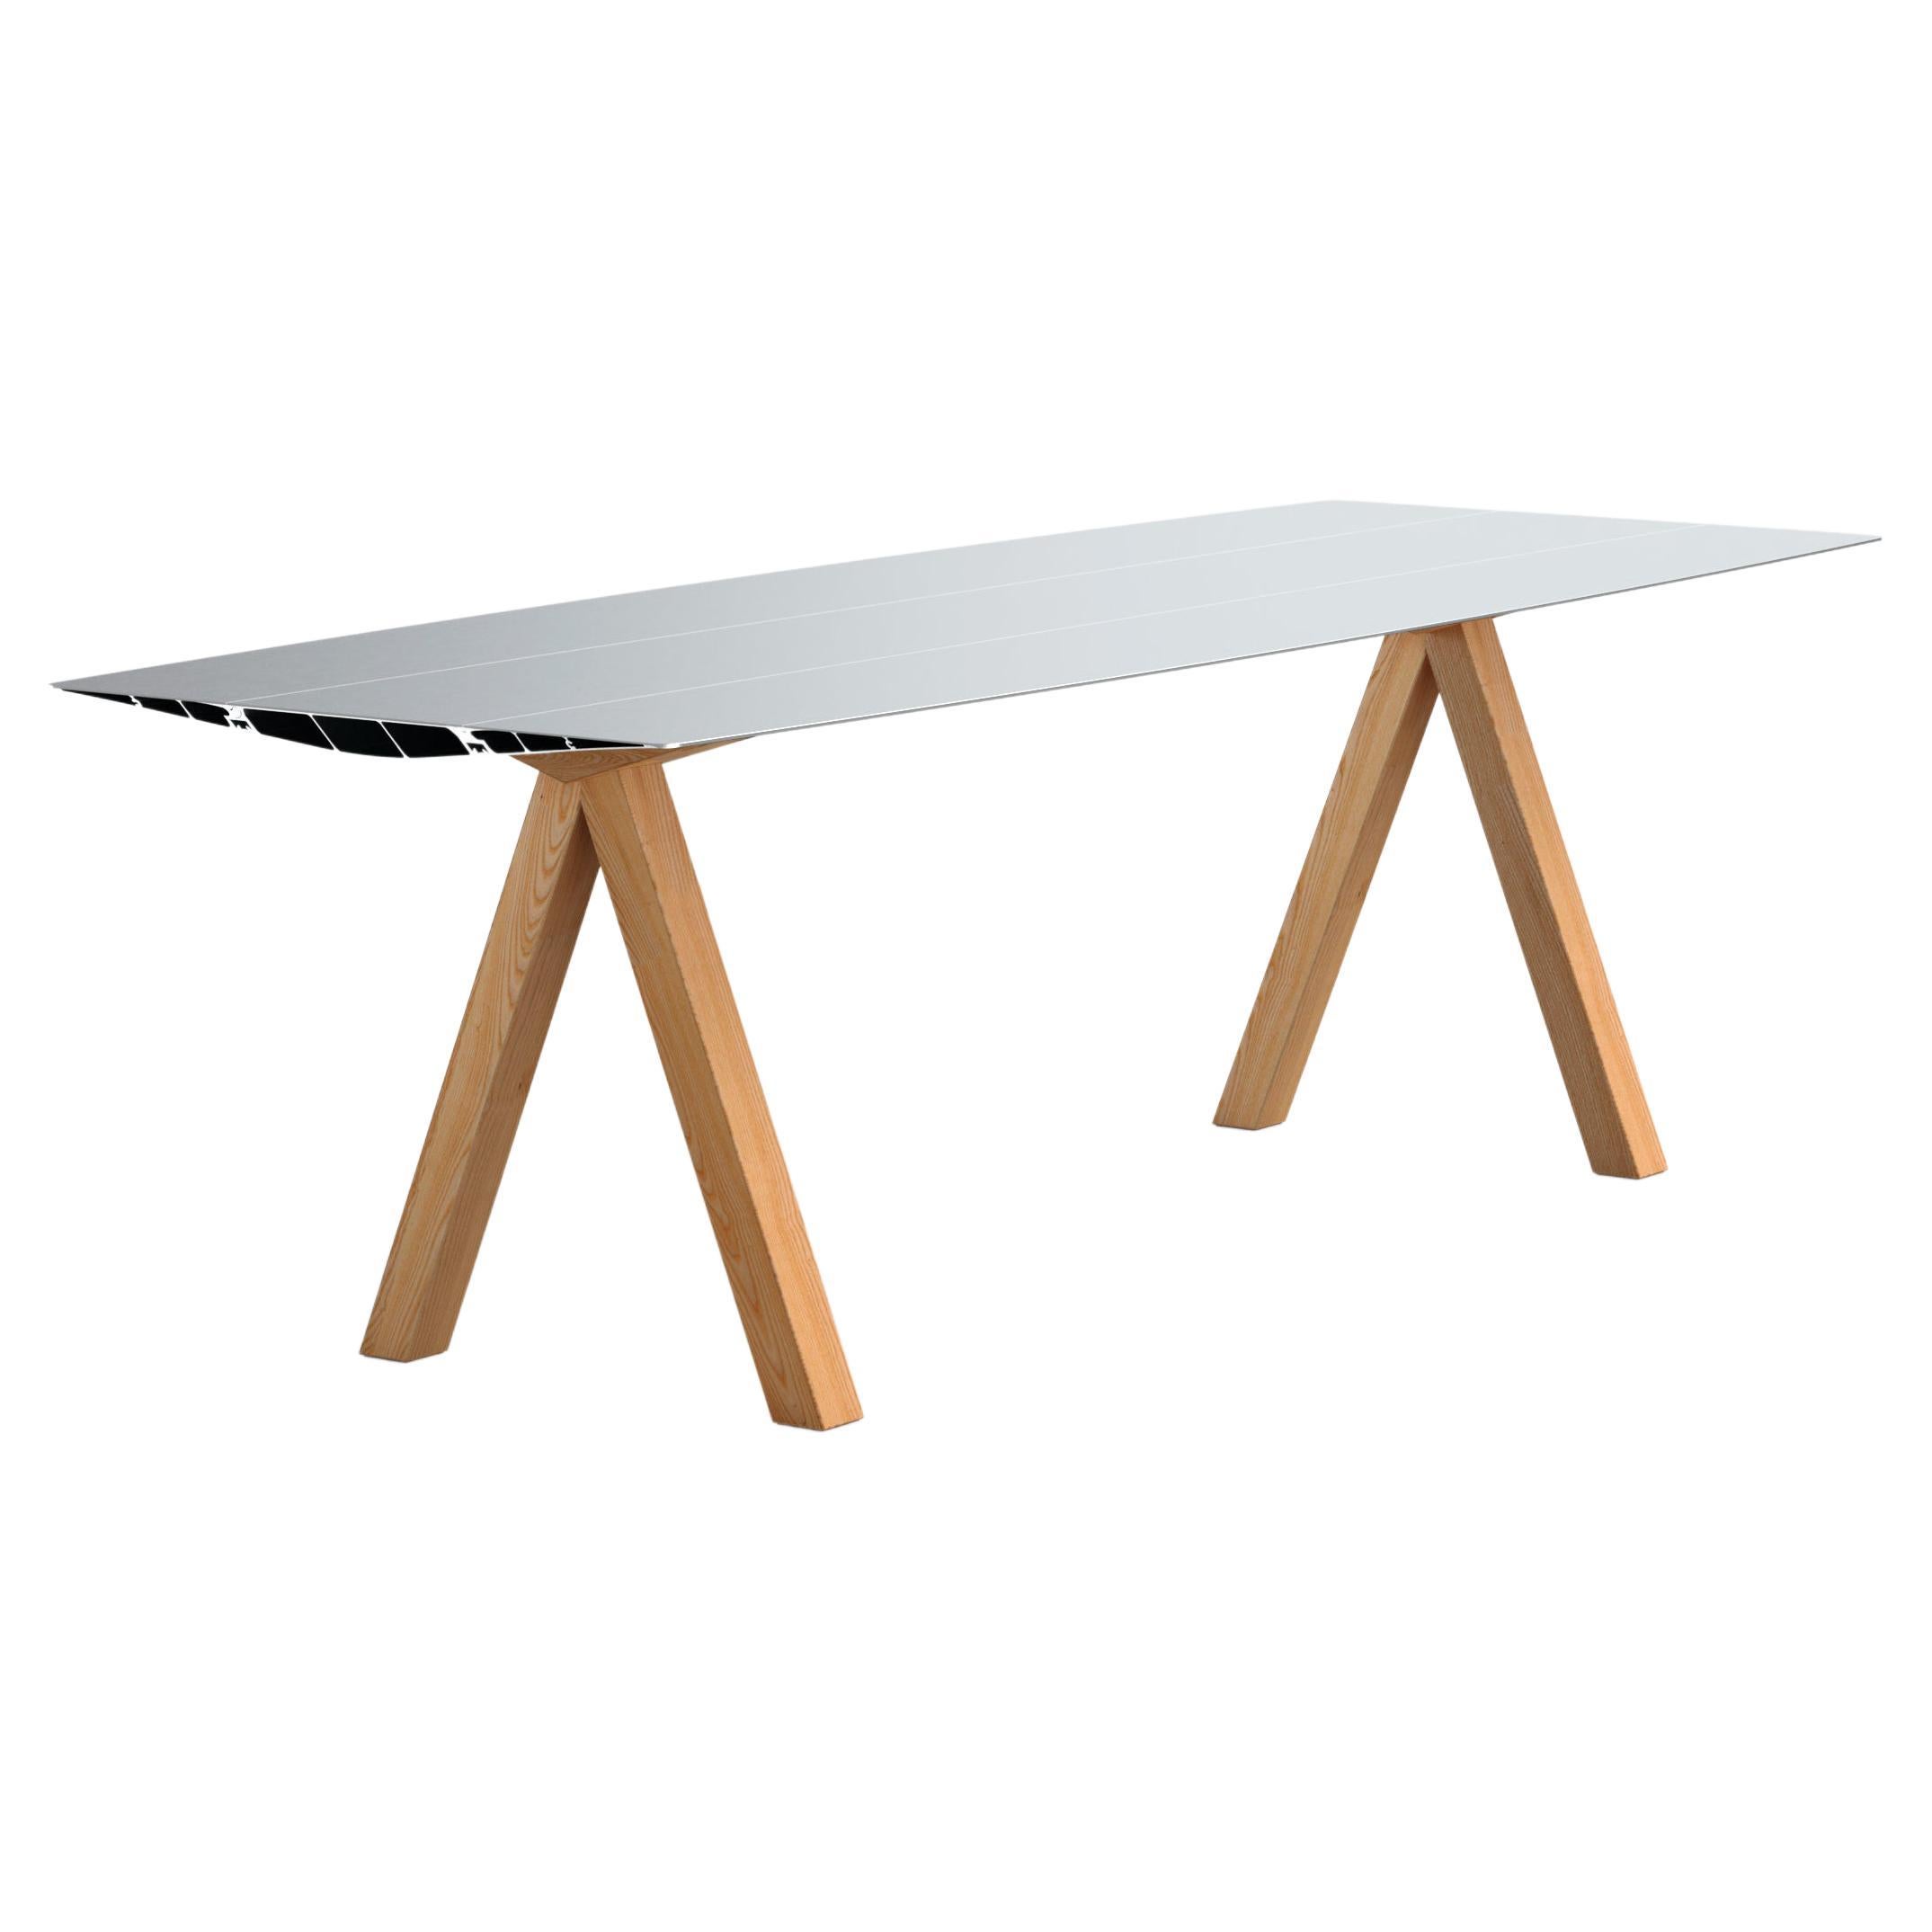 Contempory Dinning table model "Table B" Aluminum Silver Top Wooden legs 